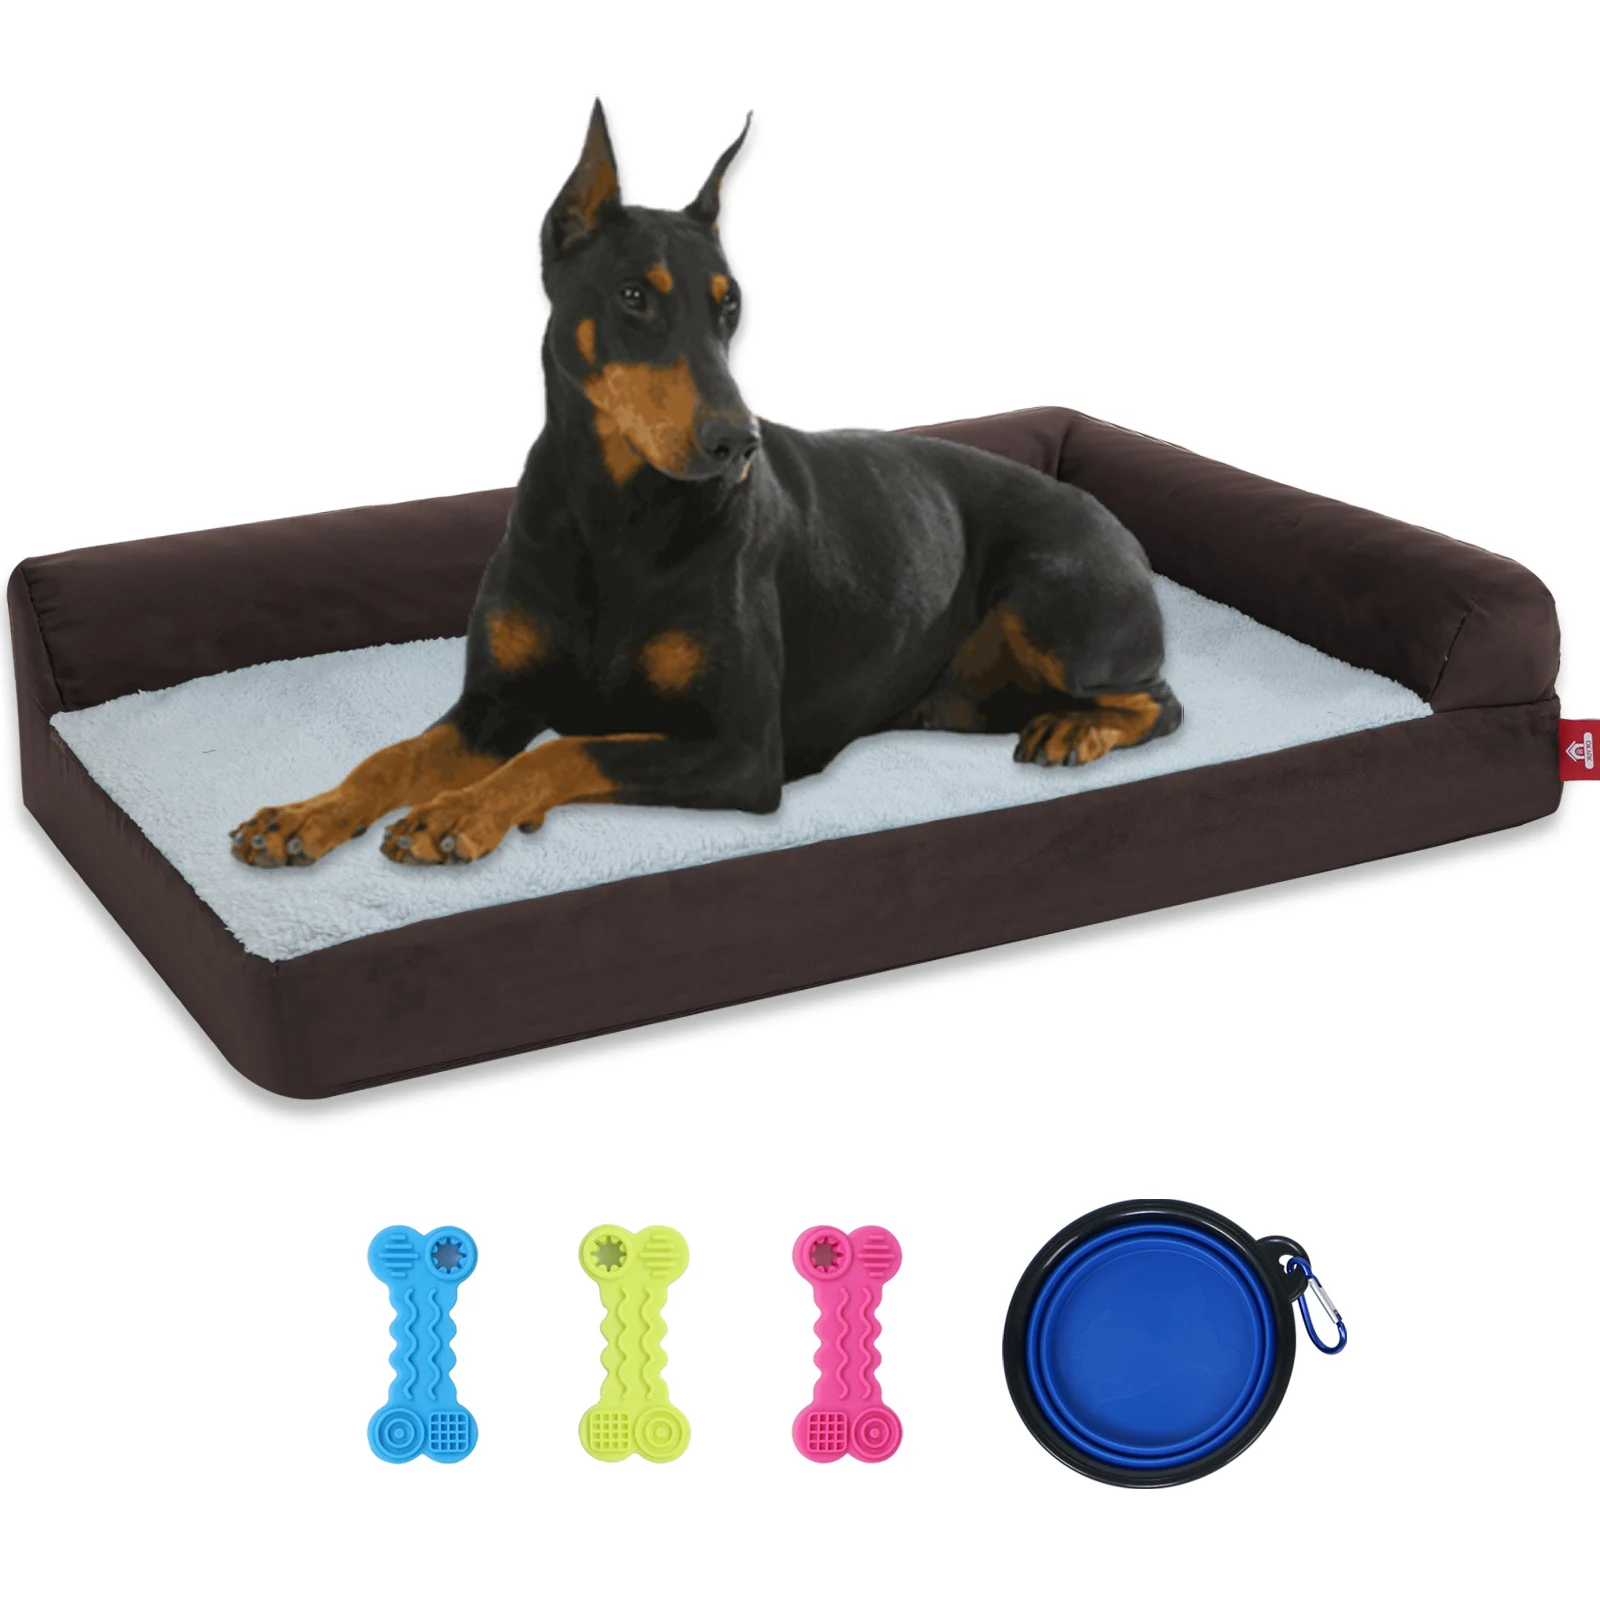 

Dog Beds for Large Dogs, Foam Pet Sofa with Waterproof Lining, Removable Washable Cover and Nonskid Bottom, Dog Couch Bed